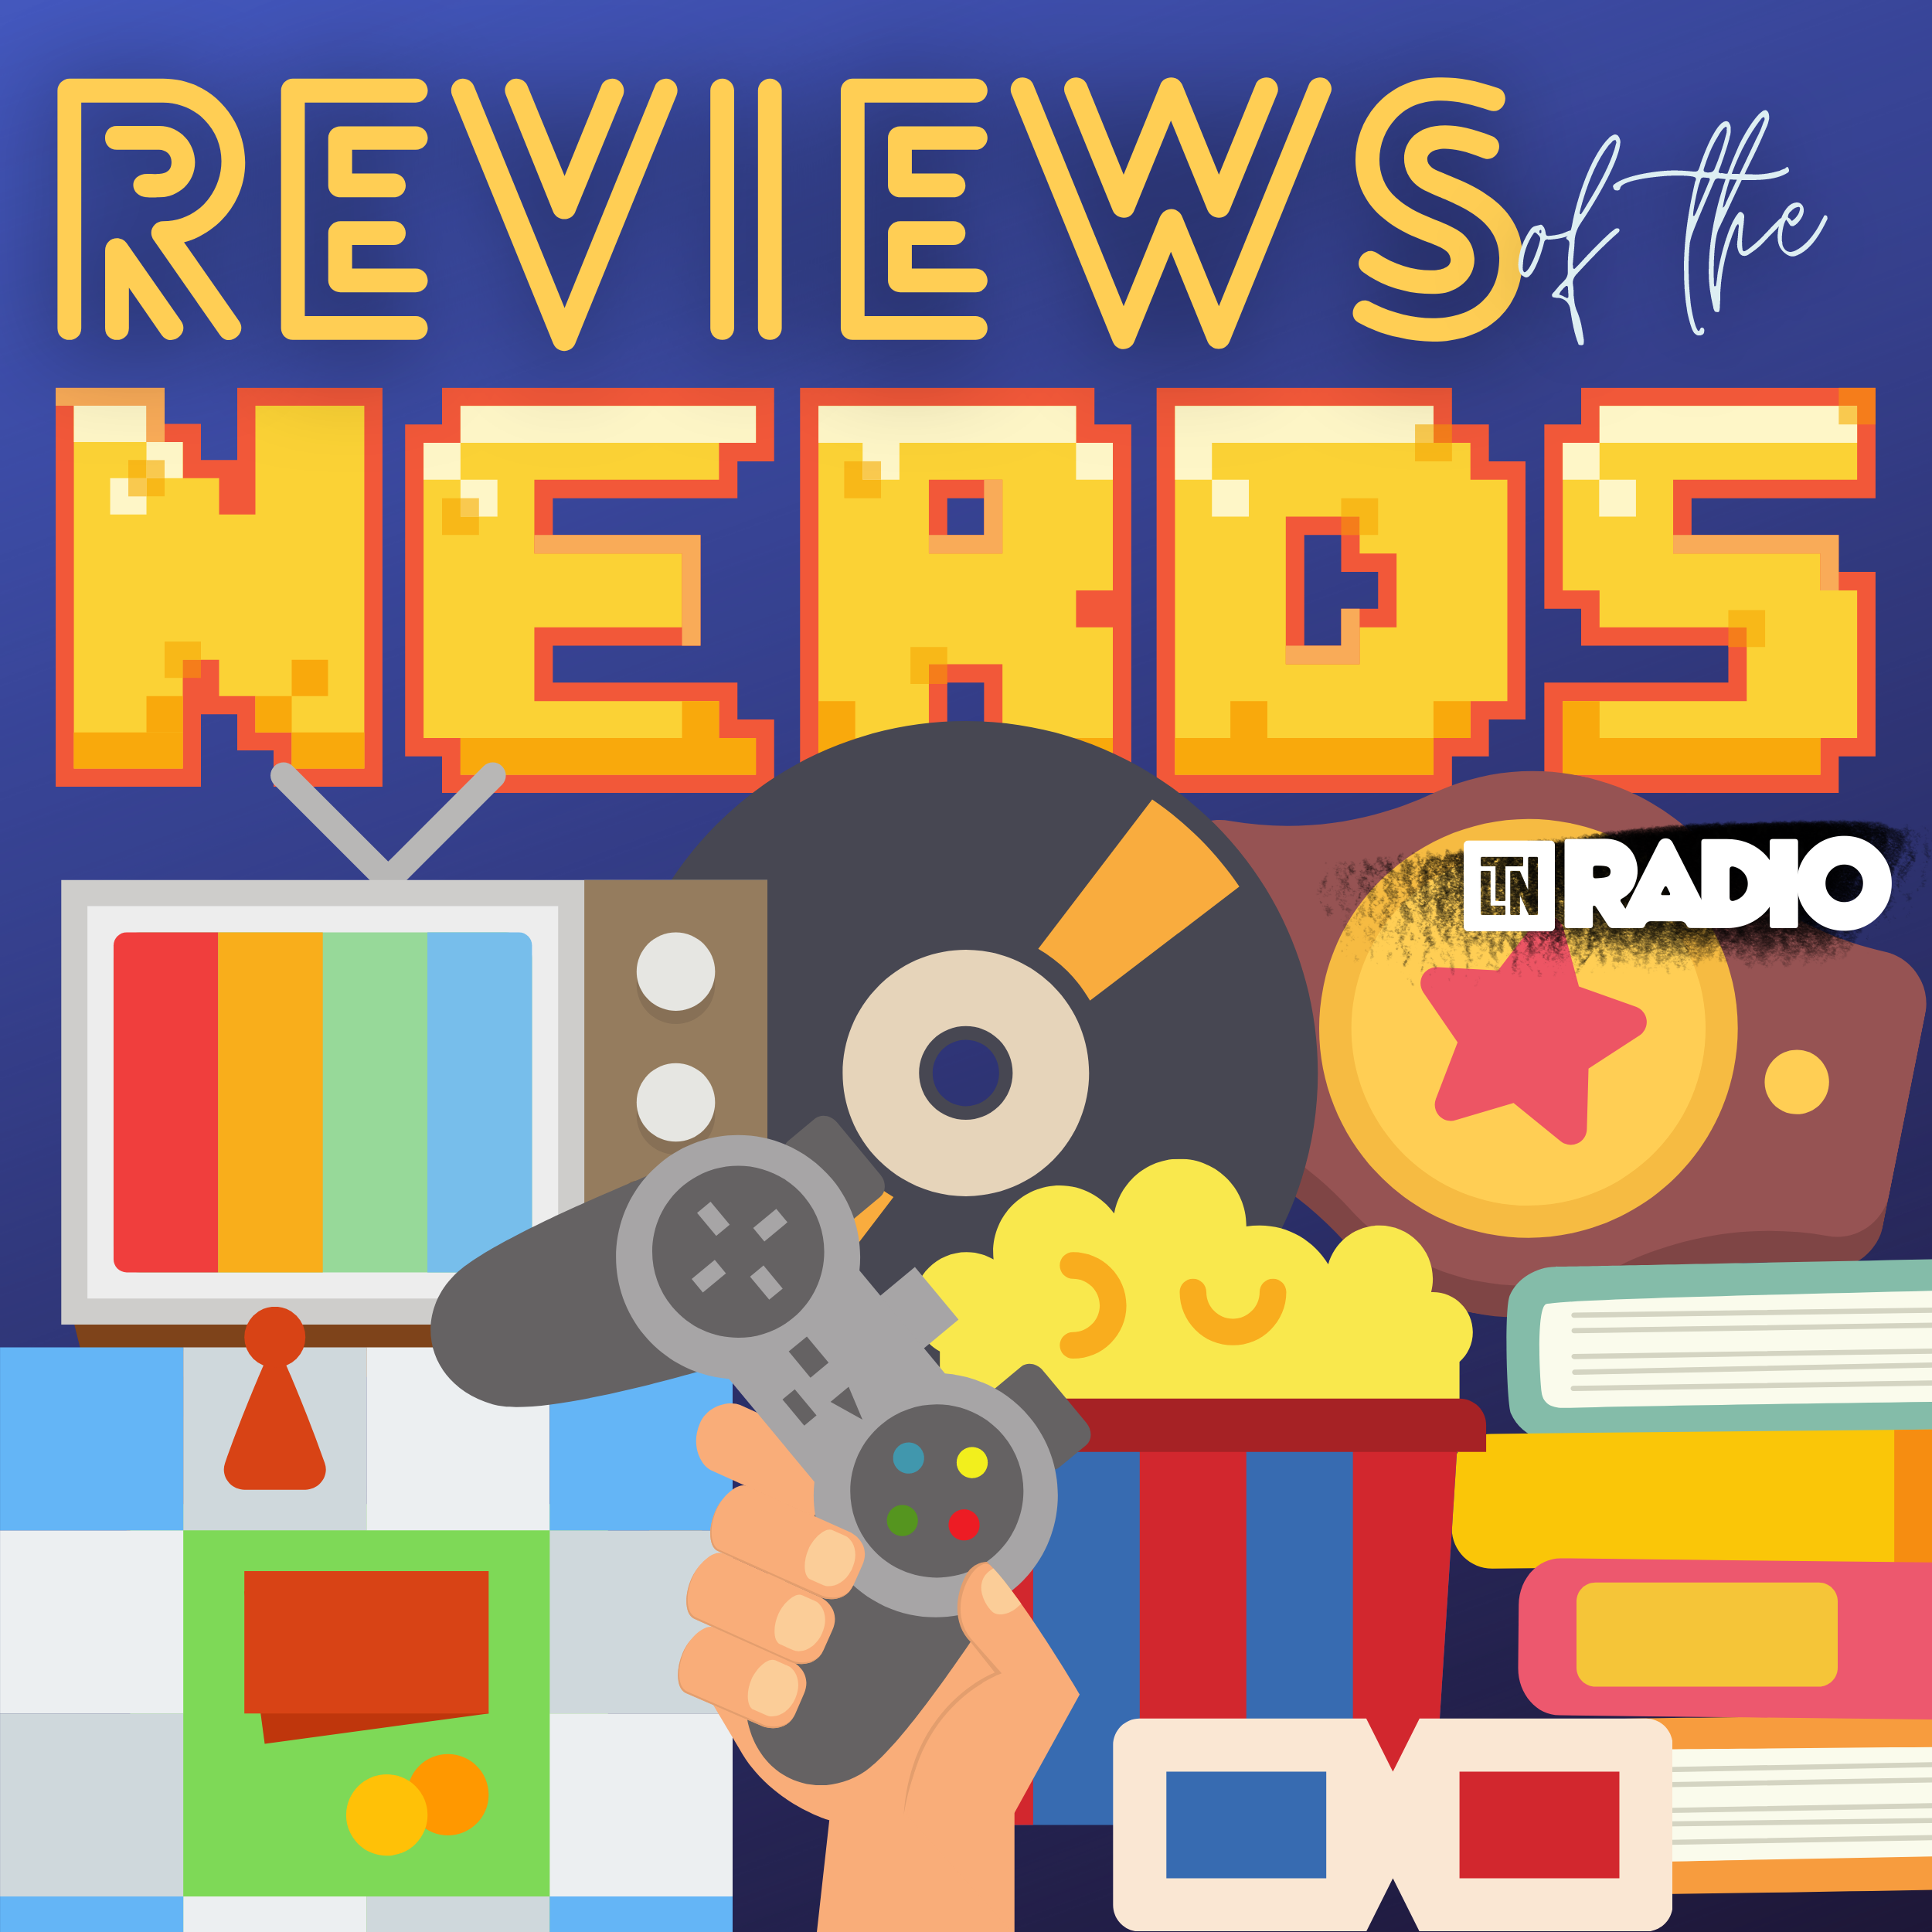 Reviews of the Nerds | Sunday School Answers